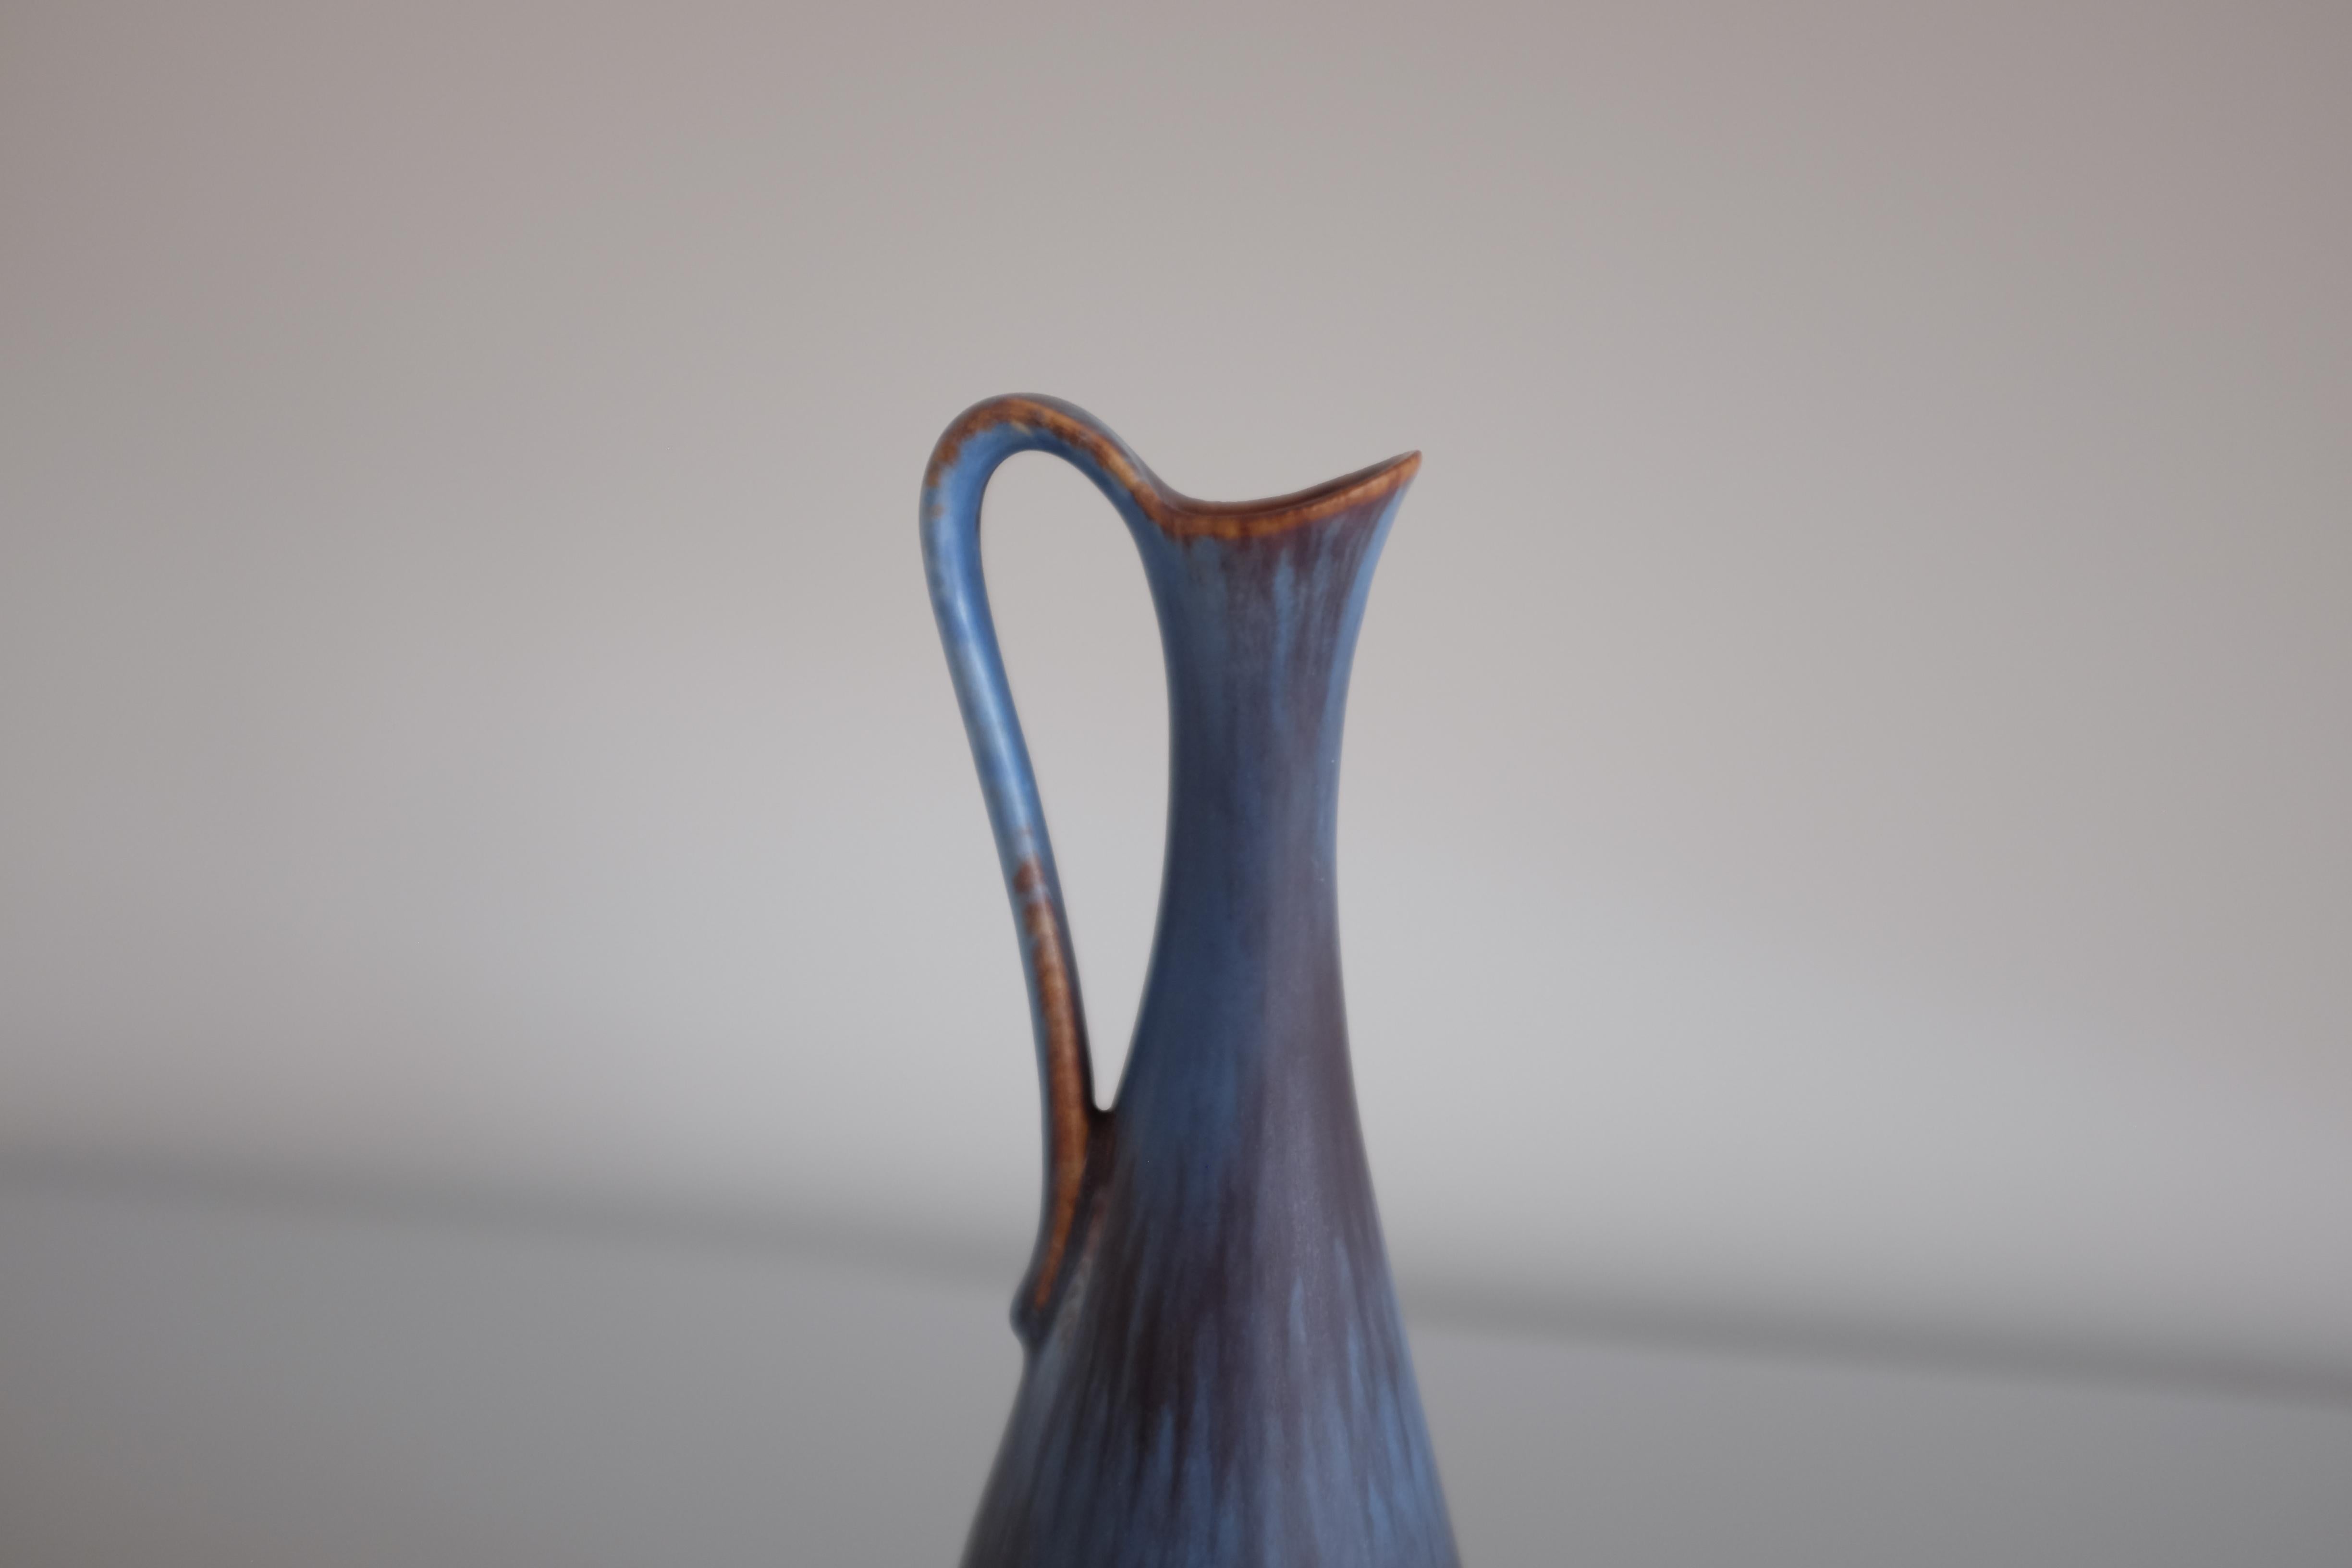 1950s Ceramic vase model ARL by Gunnar Nylund for Rörstrand, Sweden. In a good condition.

Dimensions: H 8 in. x W 3 in. x D 3 in.